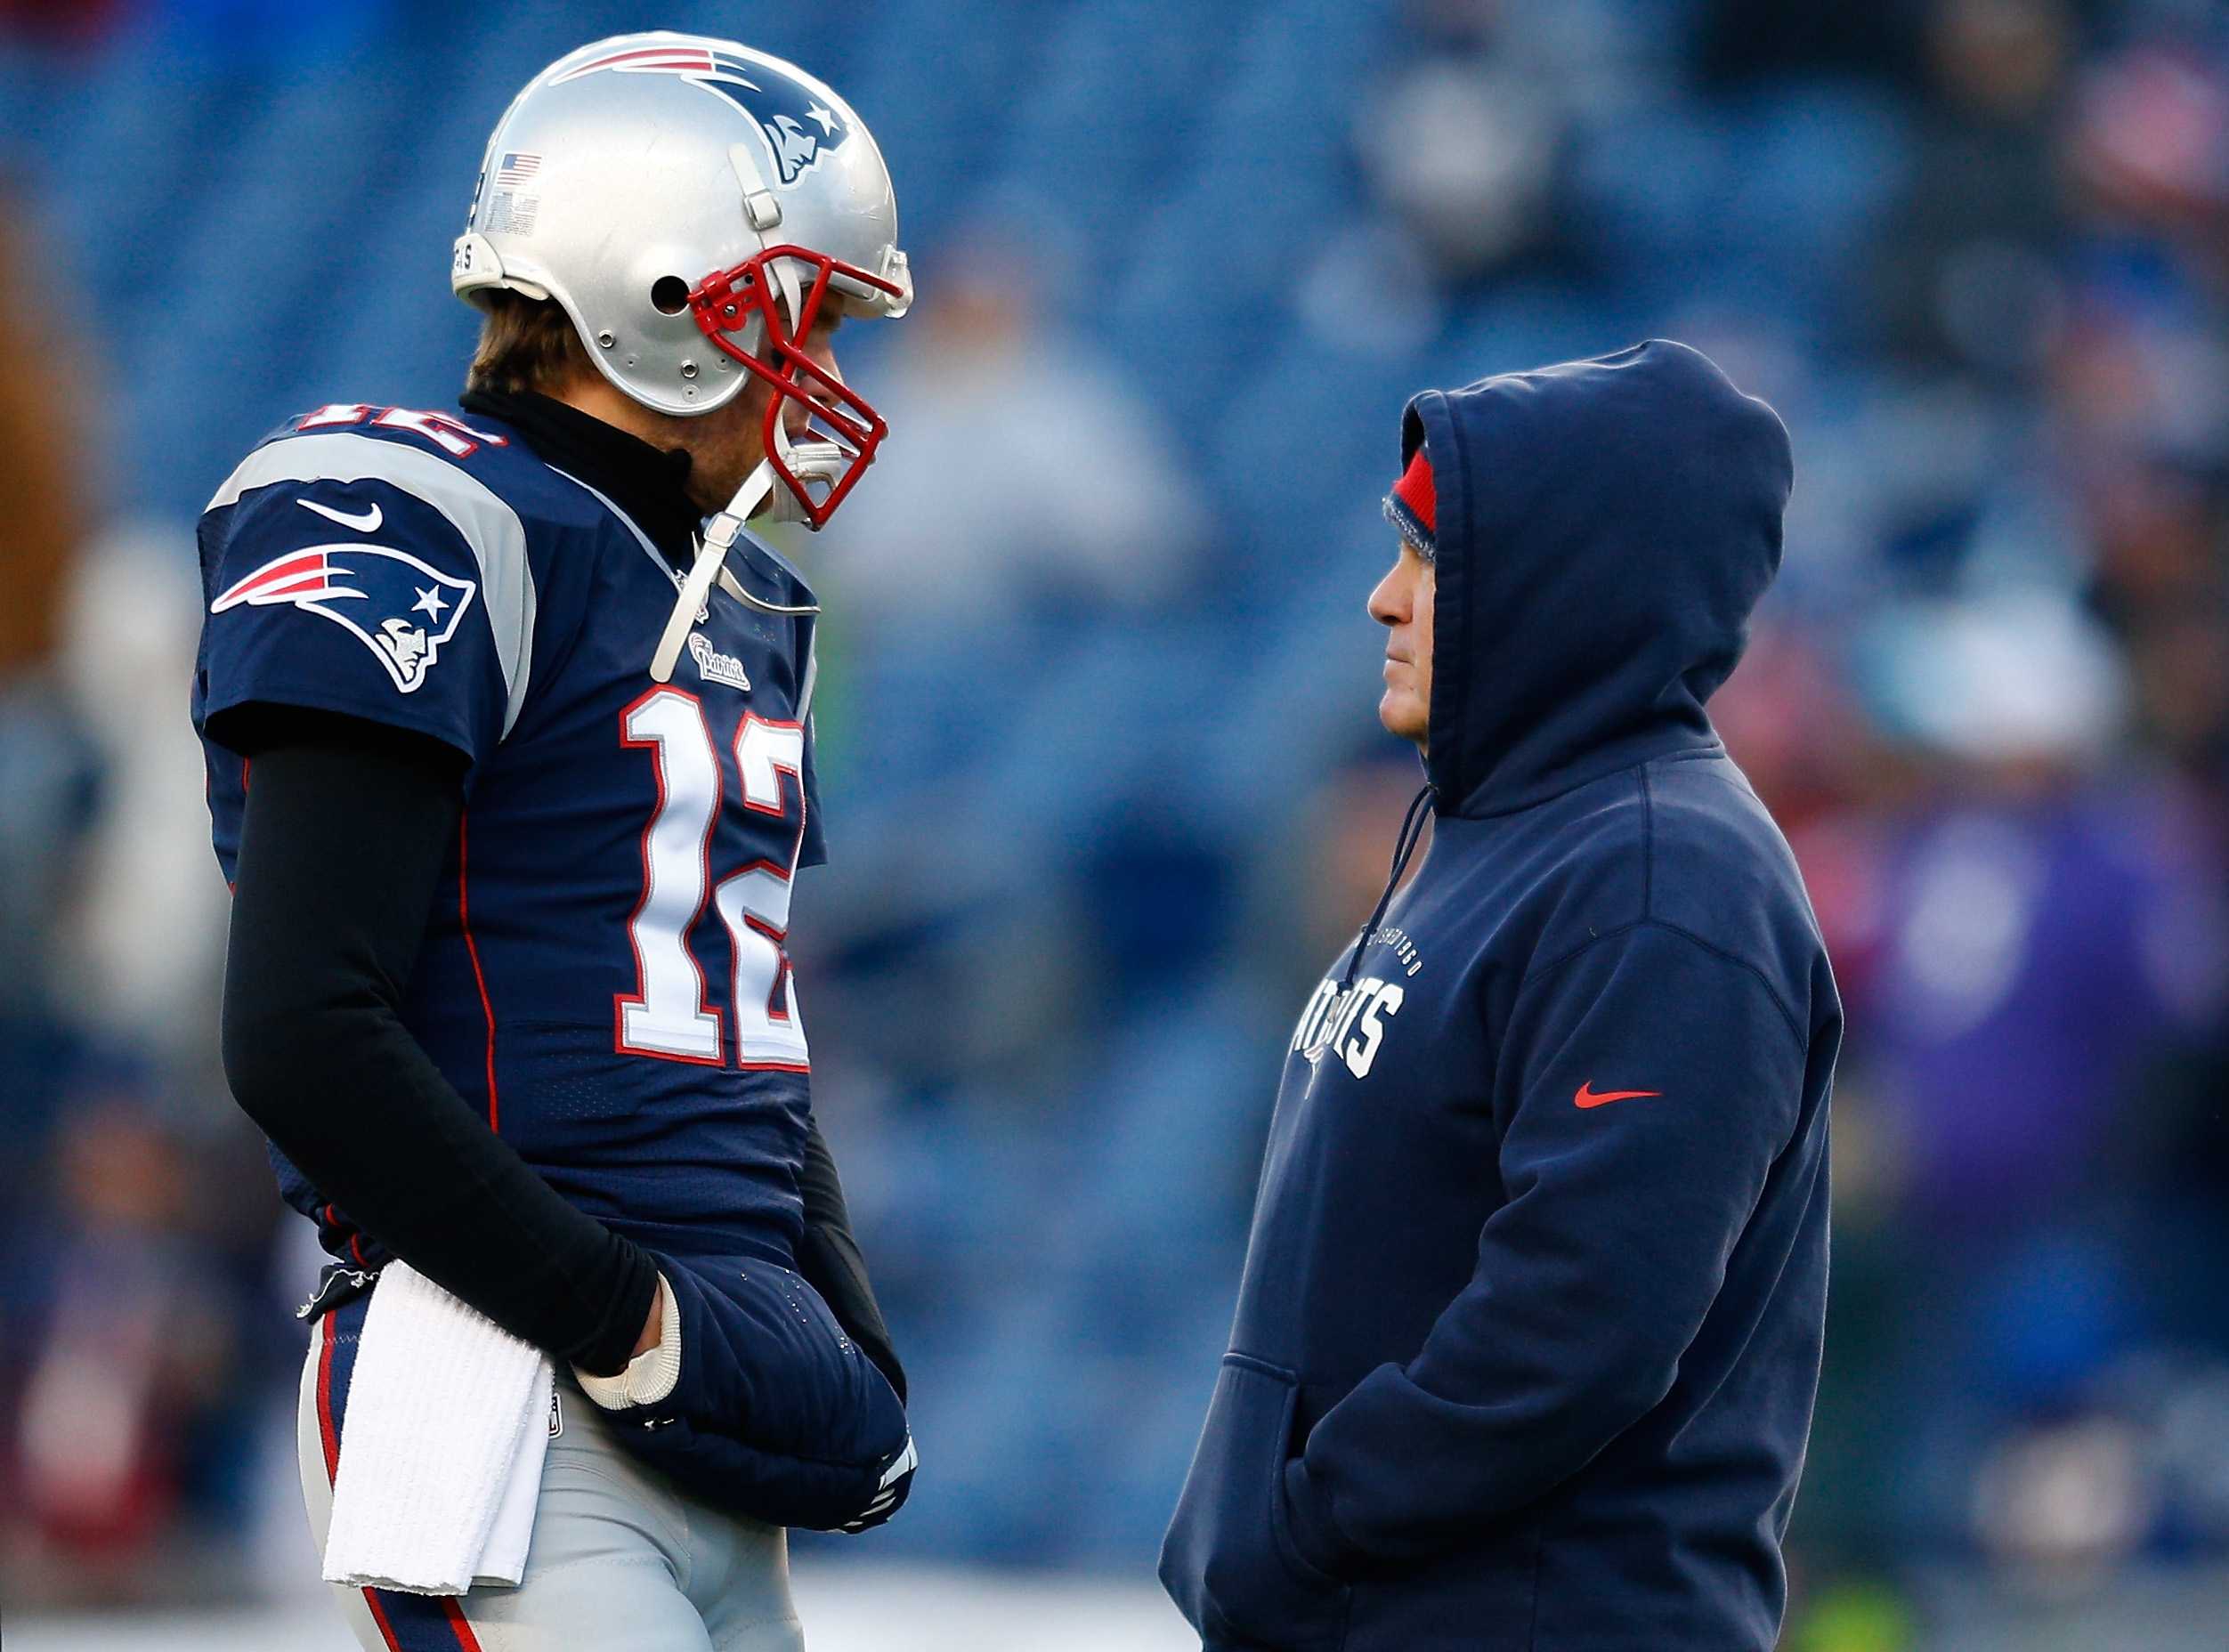 Tom Brady #12 and head coach Bill Belichick of the New England Patriots talk before the 2014 AFC Divisional Playoffs game against the Baltimore Ravens at Gillette Stadium on January 10, 2015 in Foxboro, Massachusetts (Jim Rogash&mdash;Getty Images)